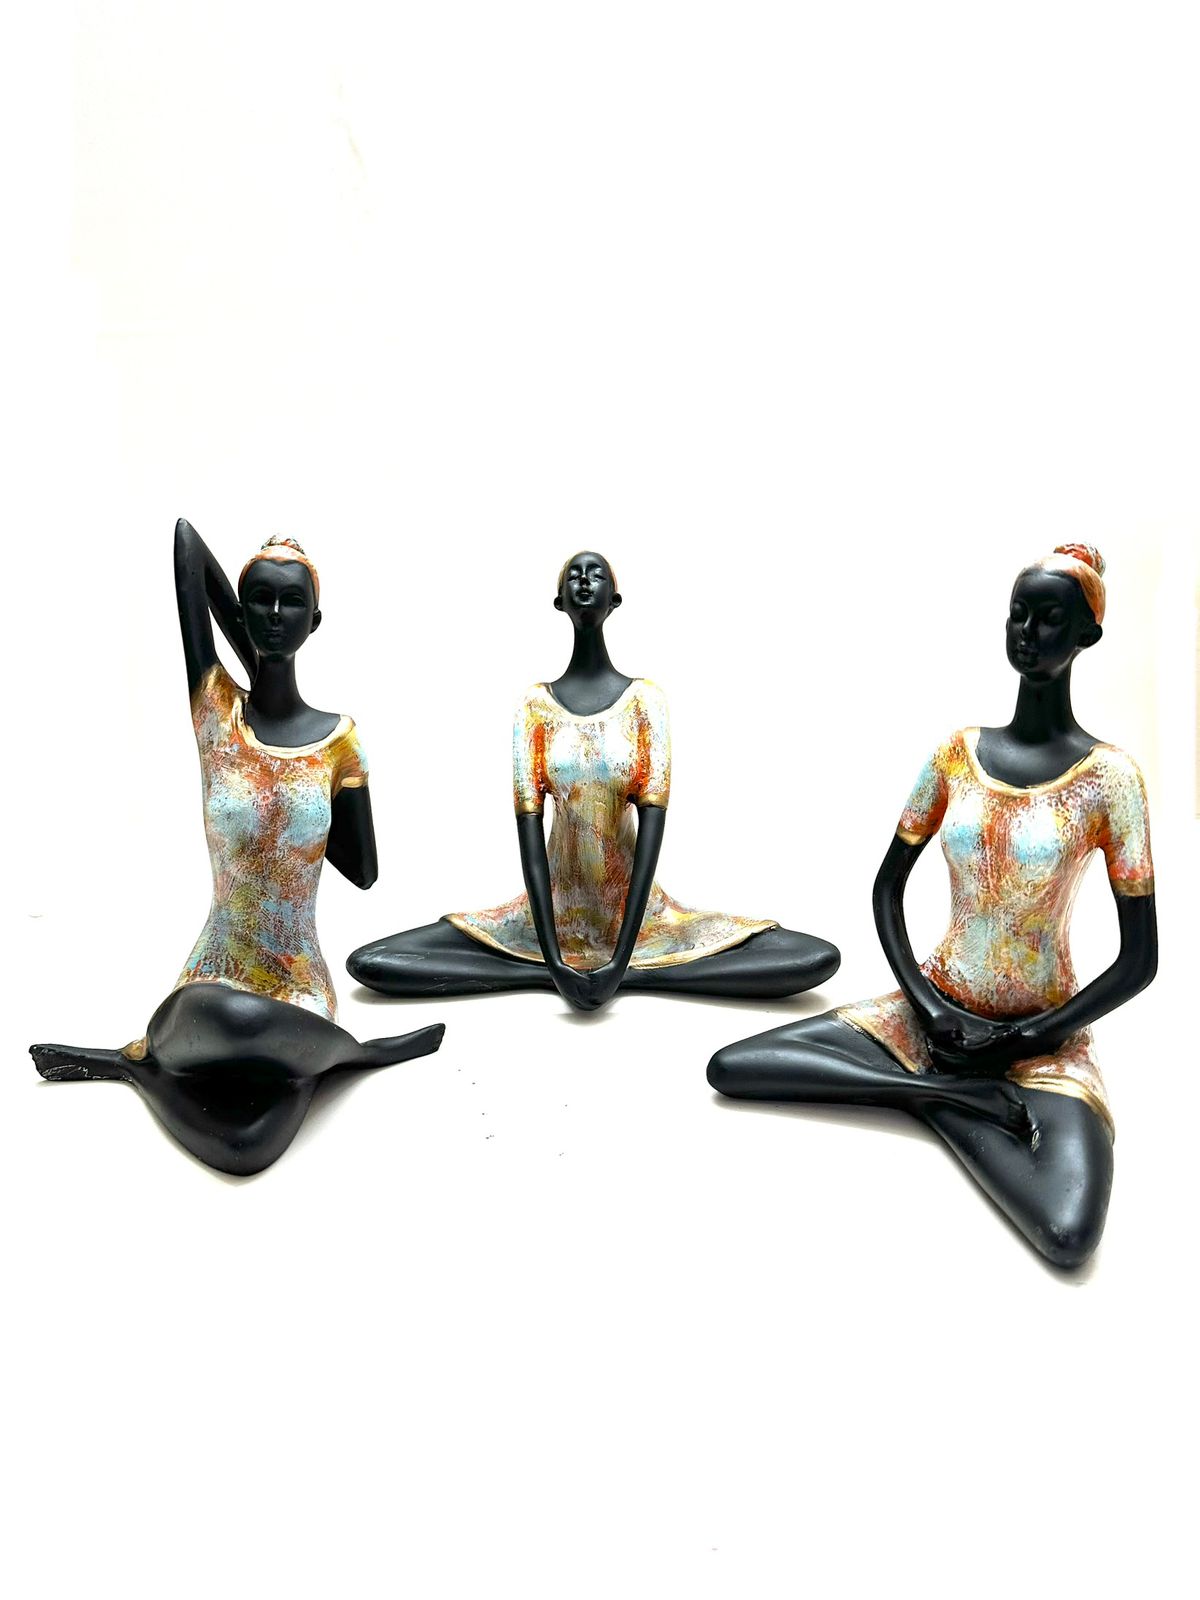 Yoga Series In Black Modern Shades Lifestyle Artefacts Handmade From Tamrapatra